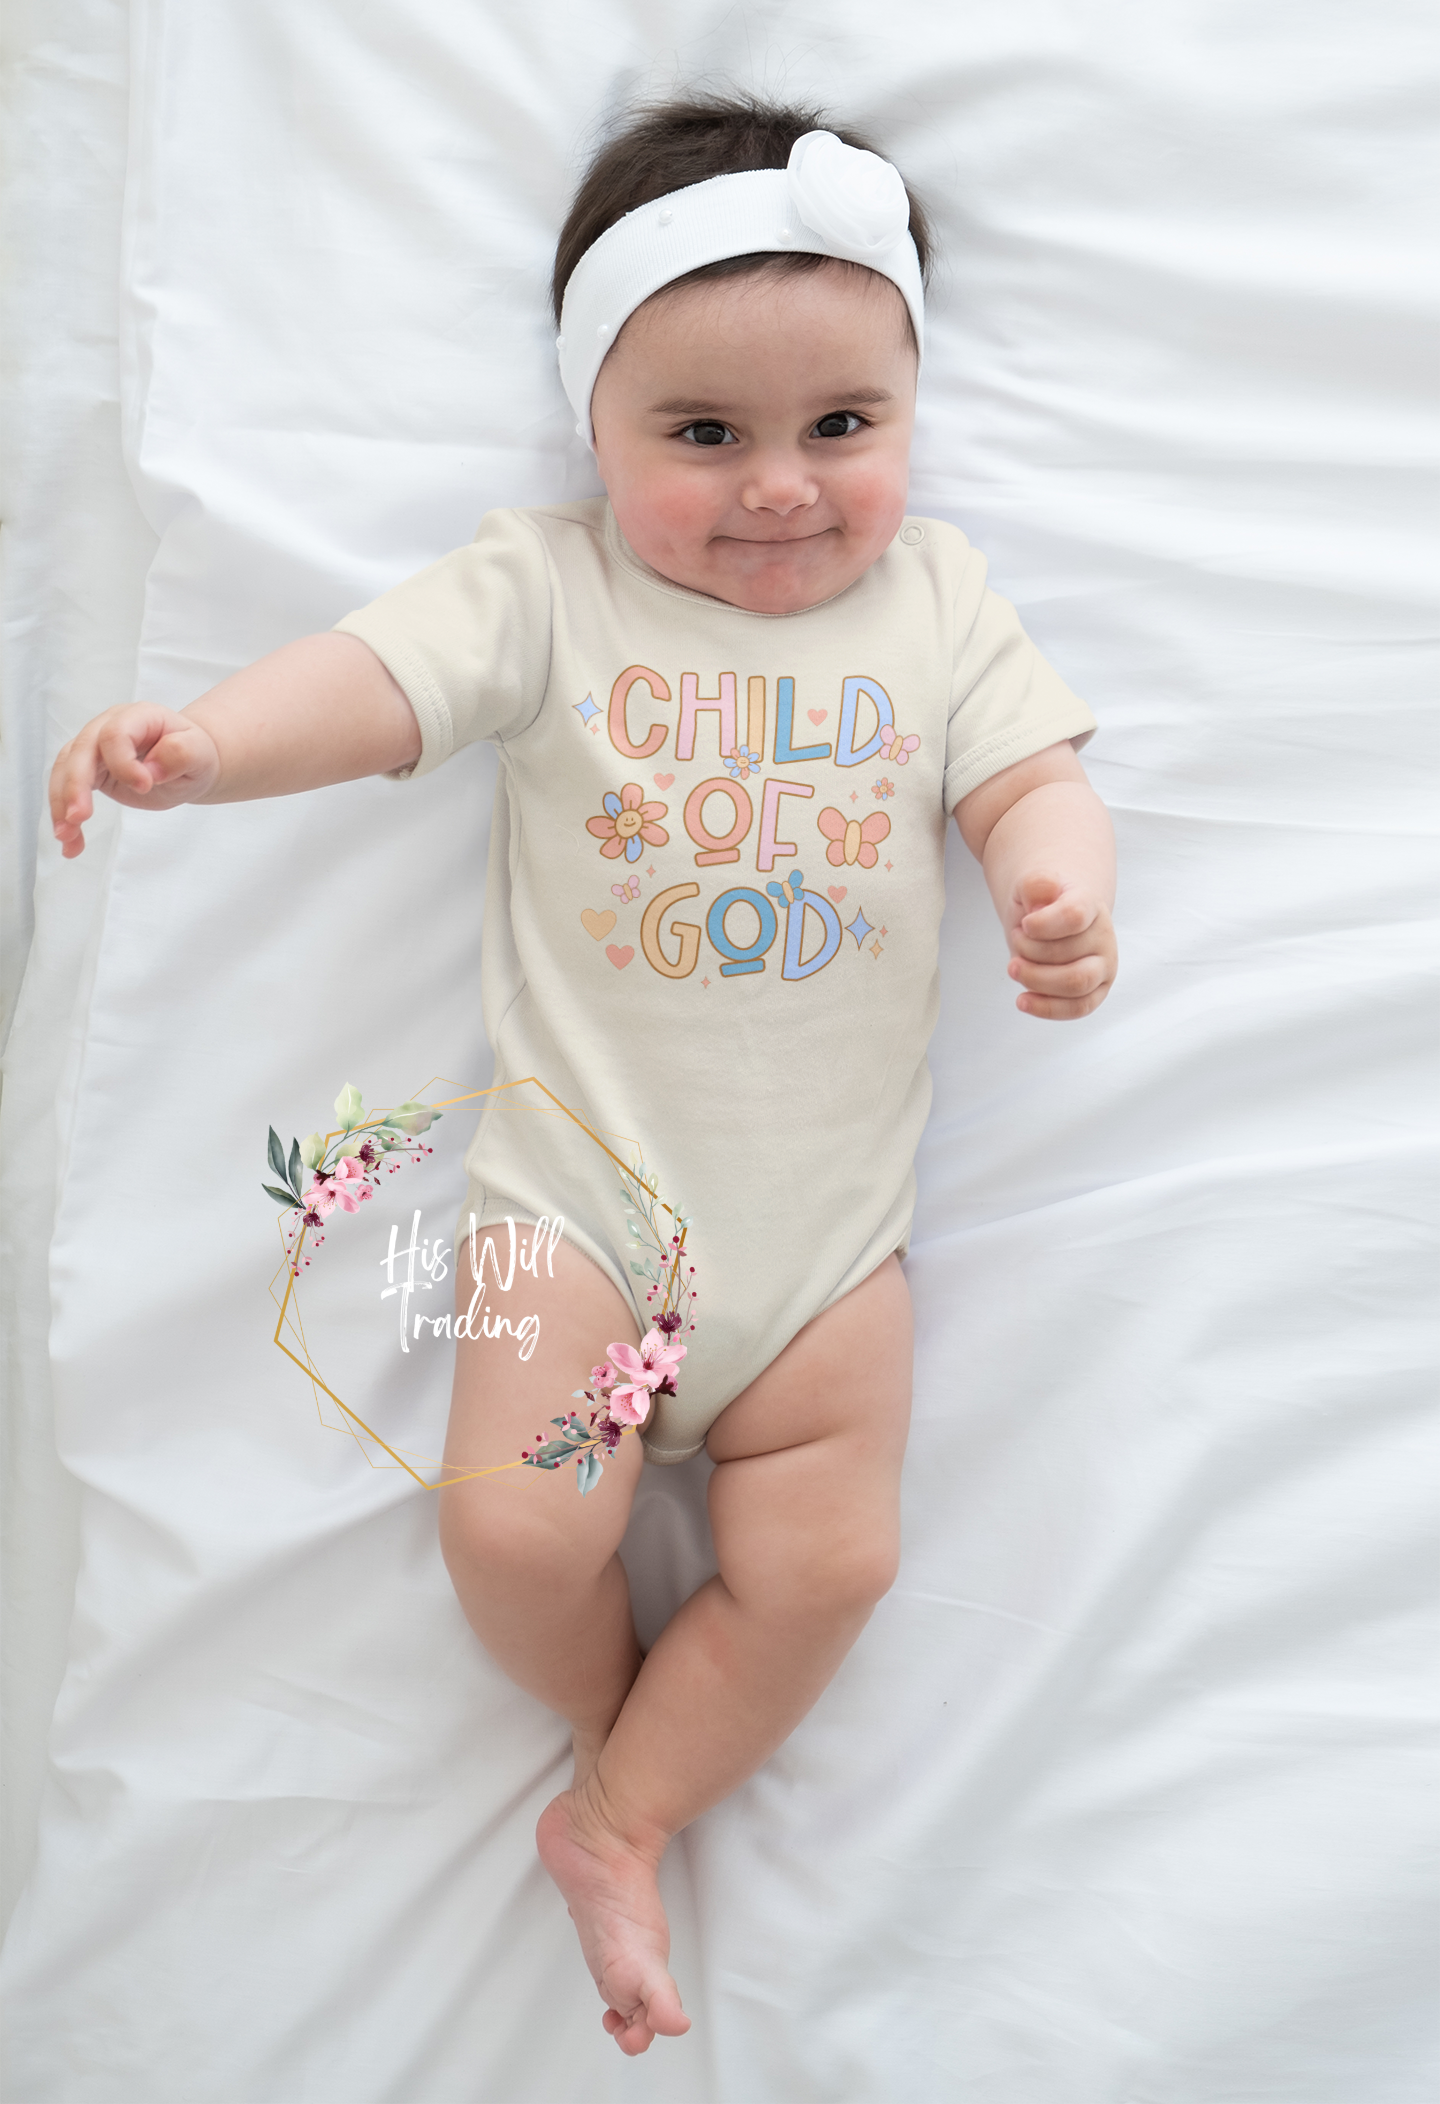 Child of God Baby Onesie-Natural, Christian Graphic Tee for babies.